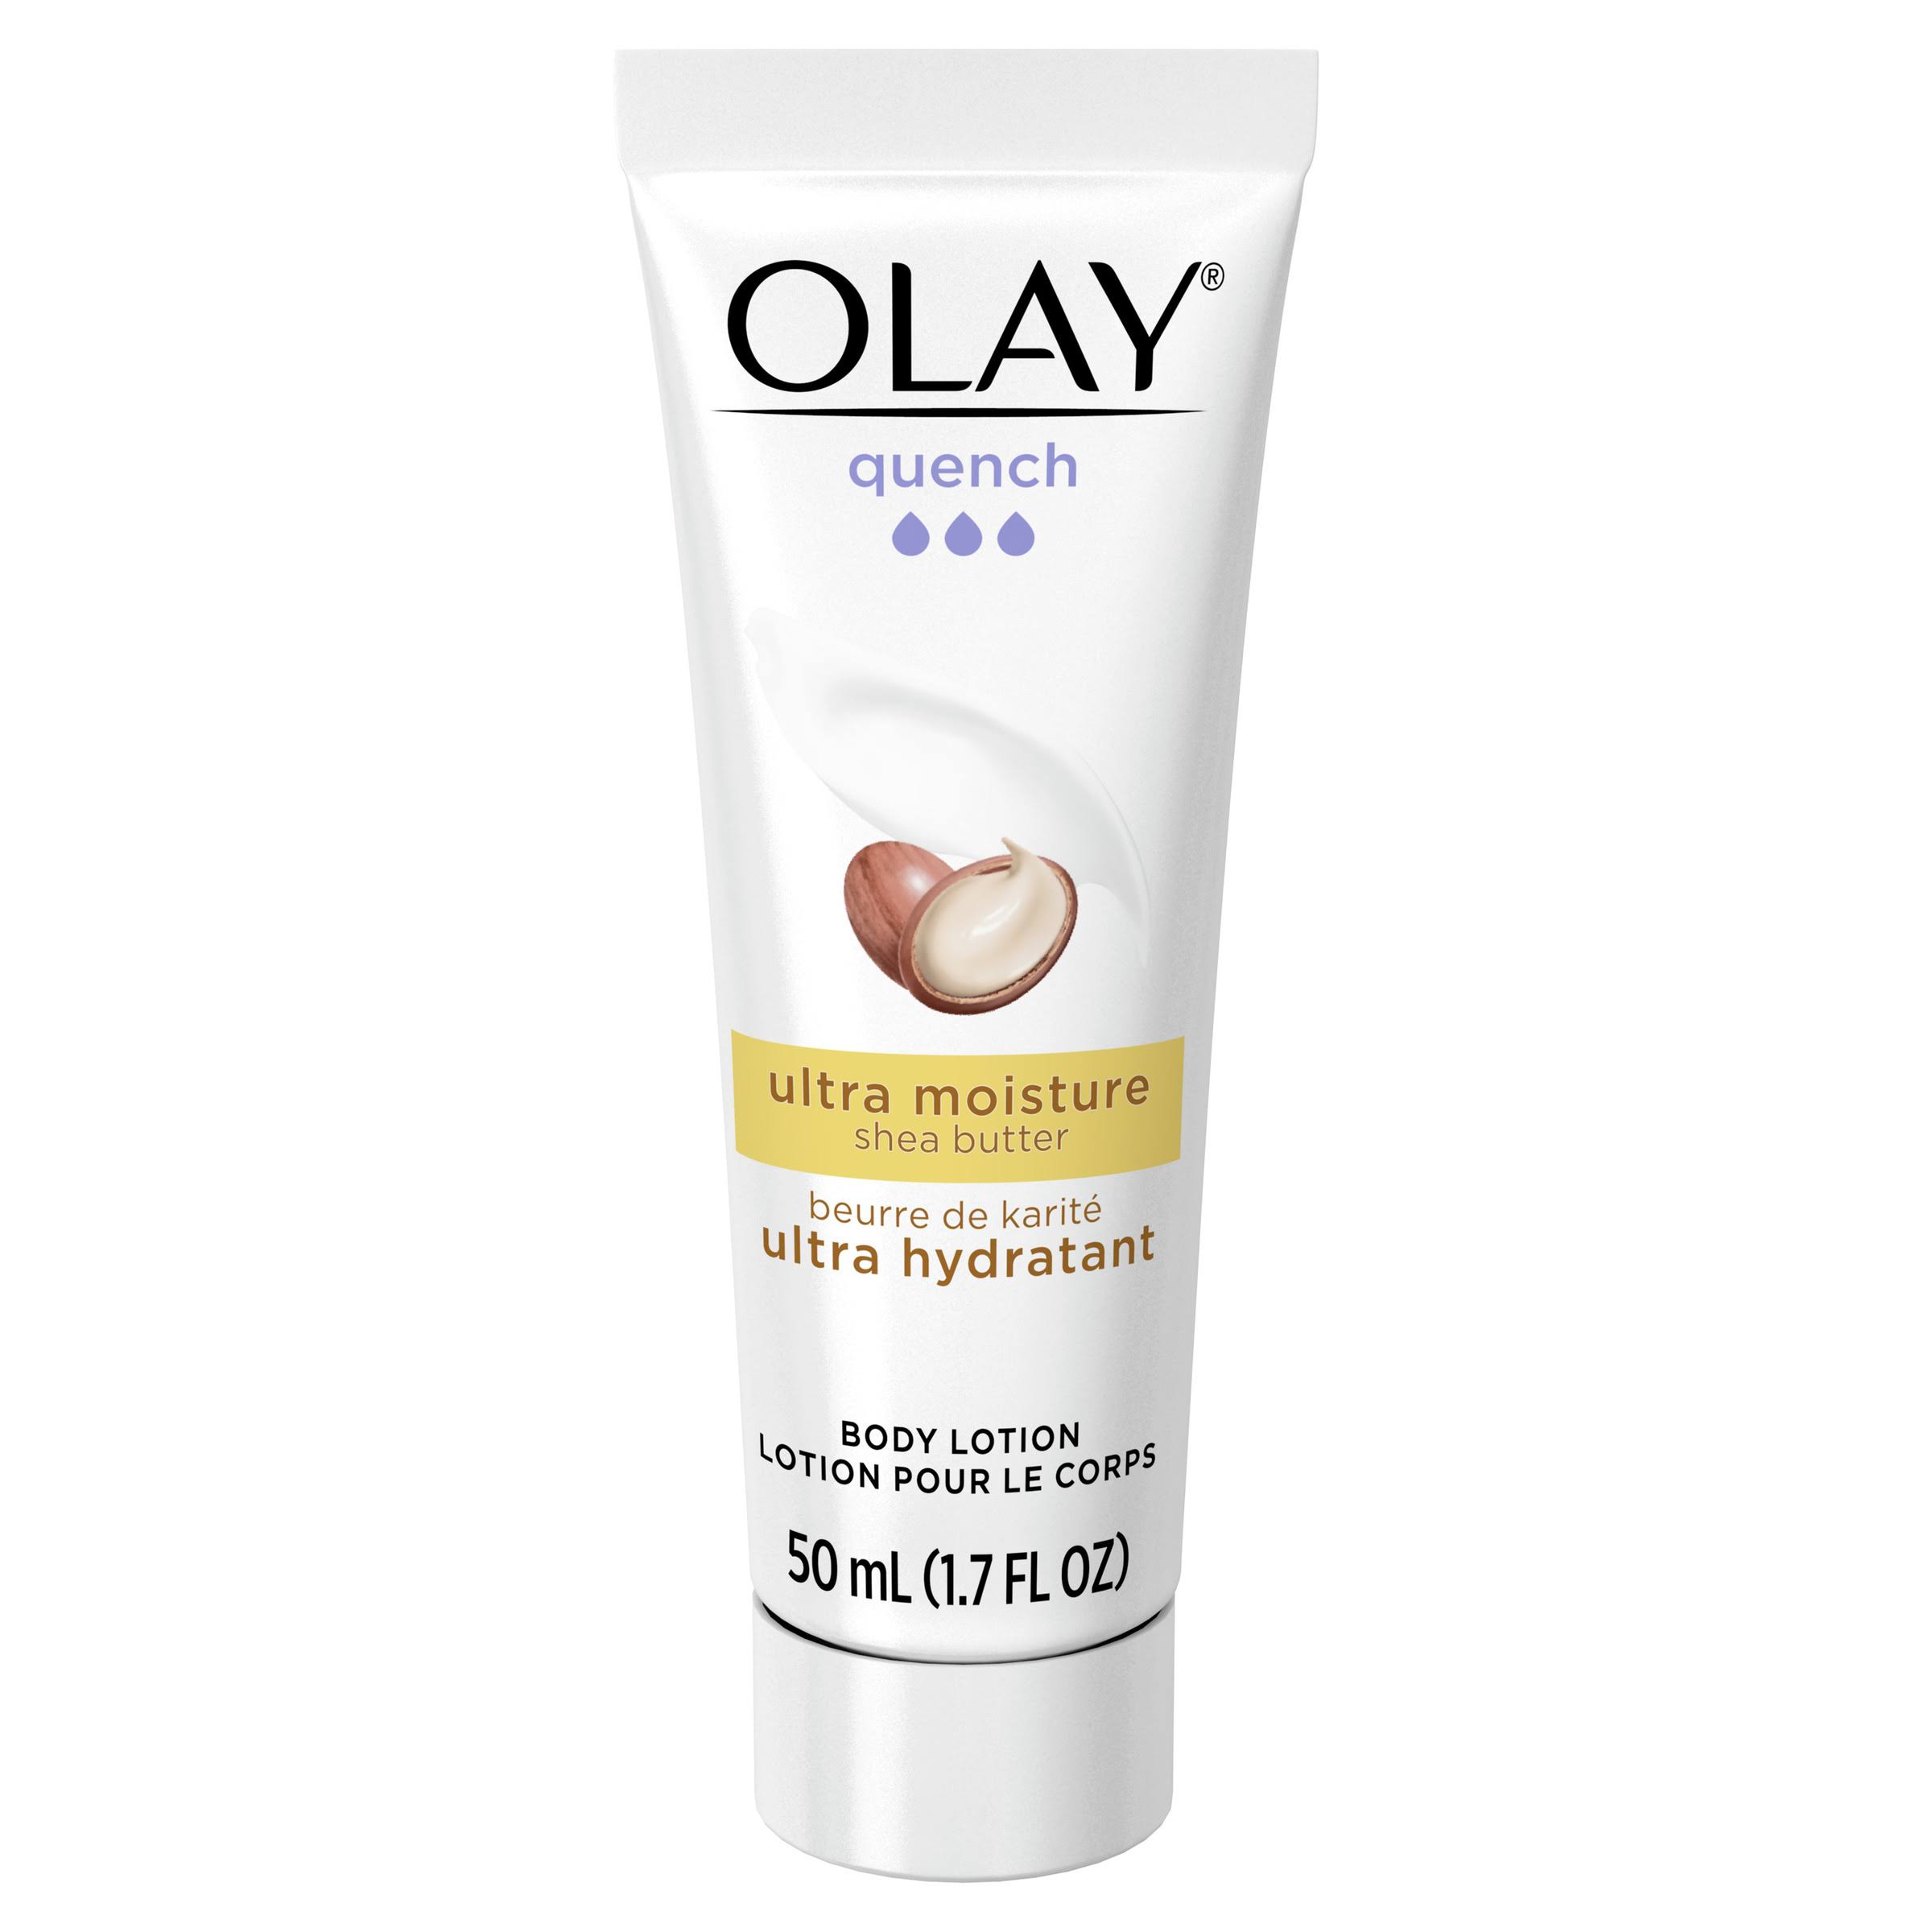 Olay Ultra Moisture Lotion with Shea Butter 1.7 oz.